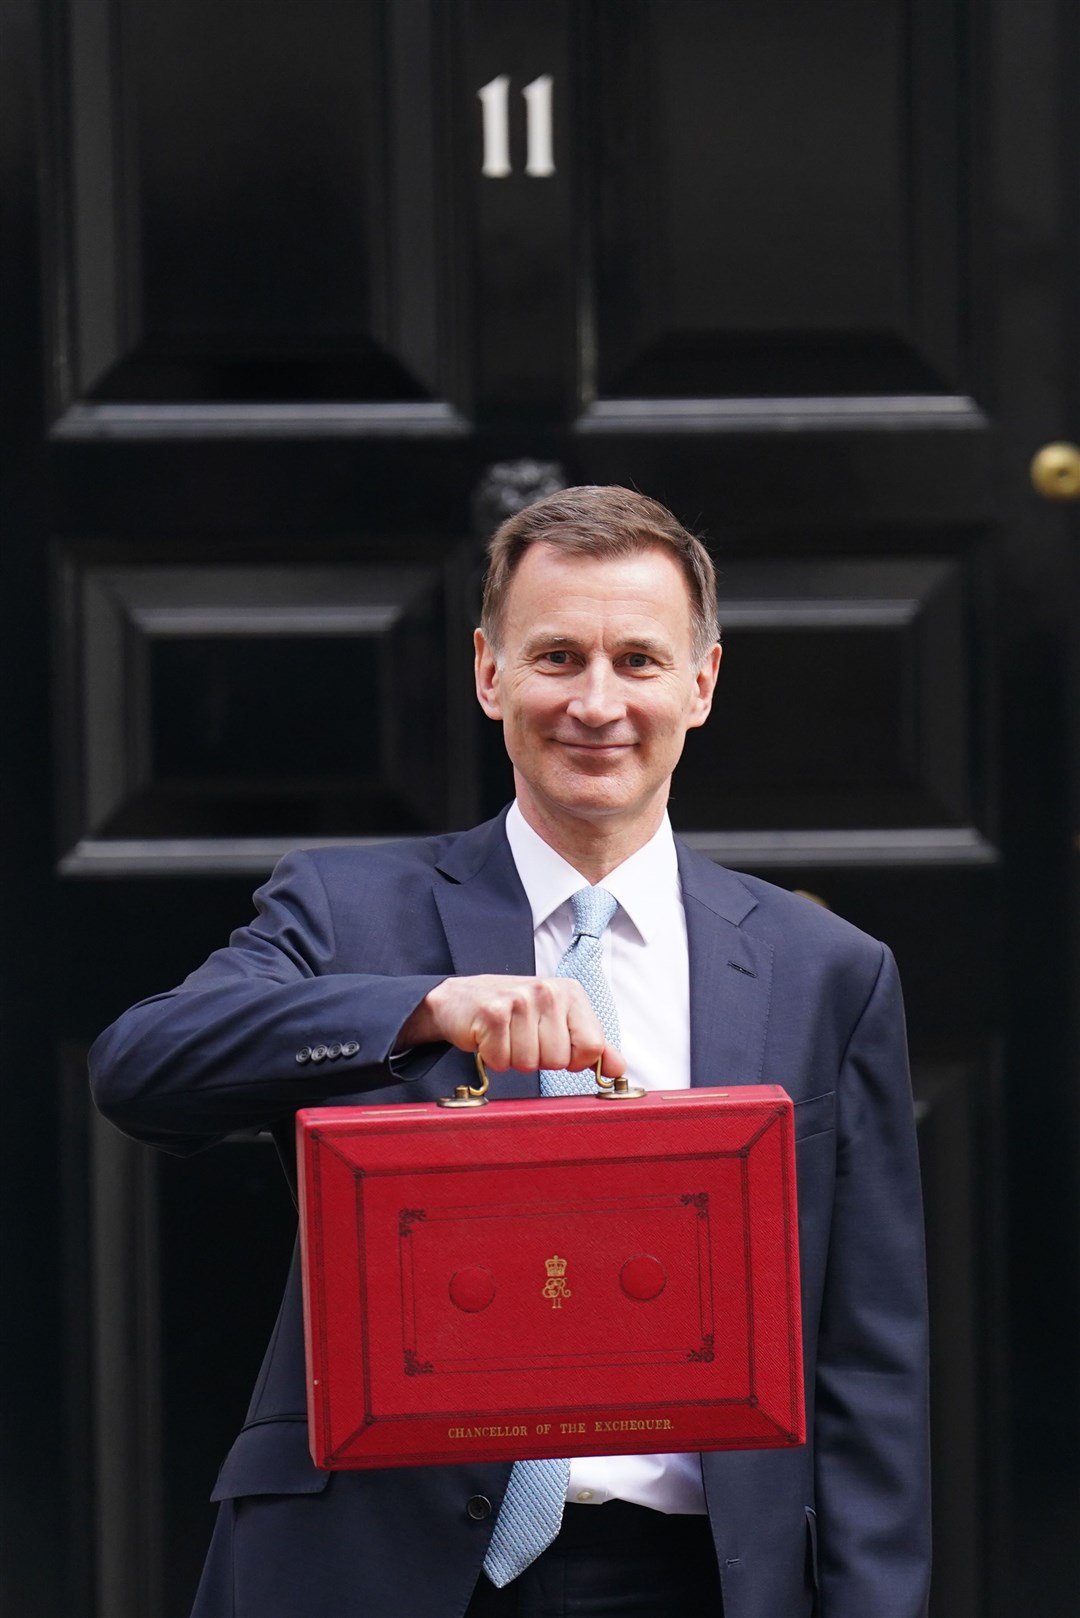 Chancellor of the Exchequer Jeremy Hunt paid for the No 11 carpet out of his own pocket (James Manning/PA)